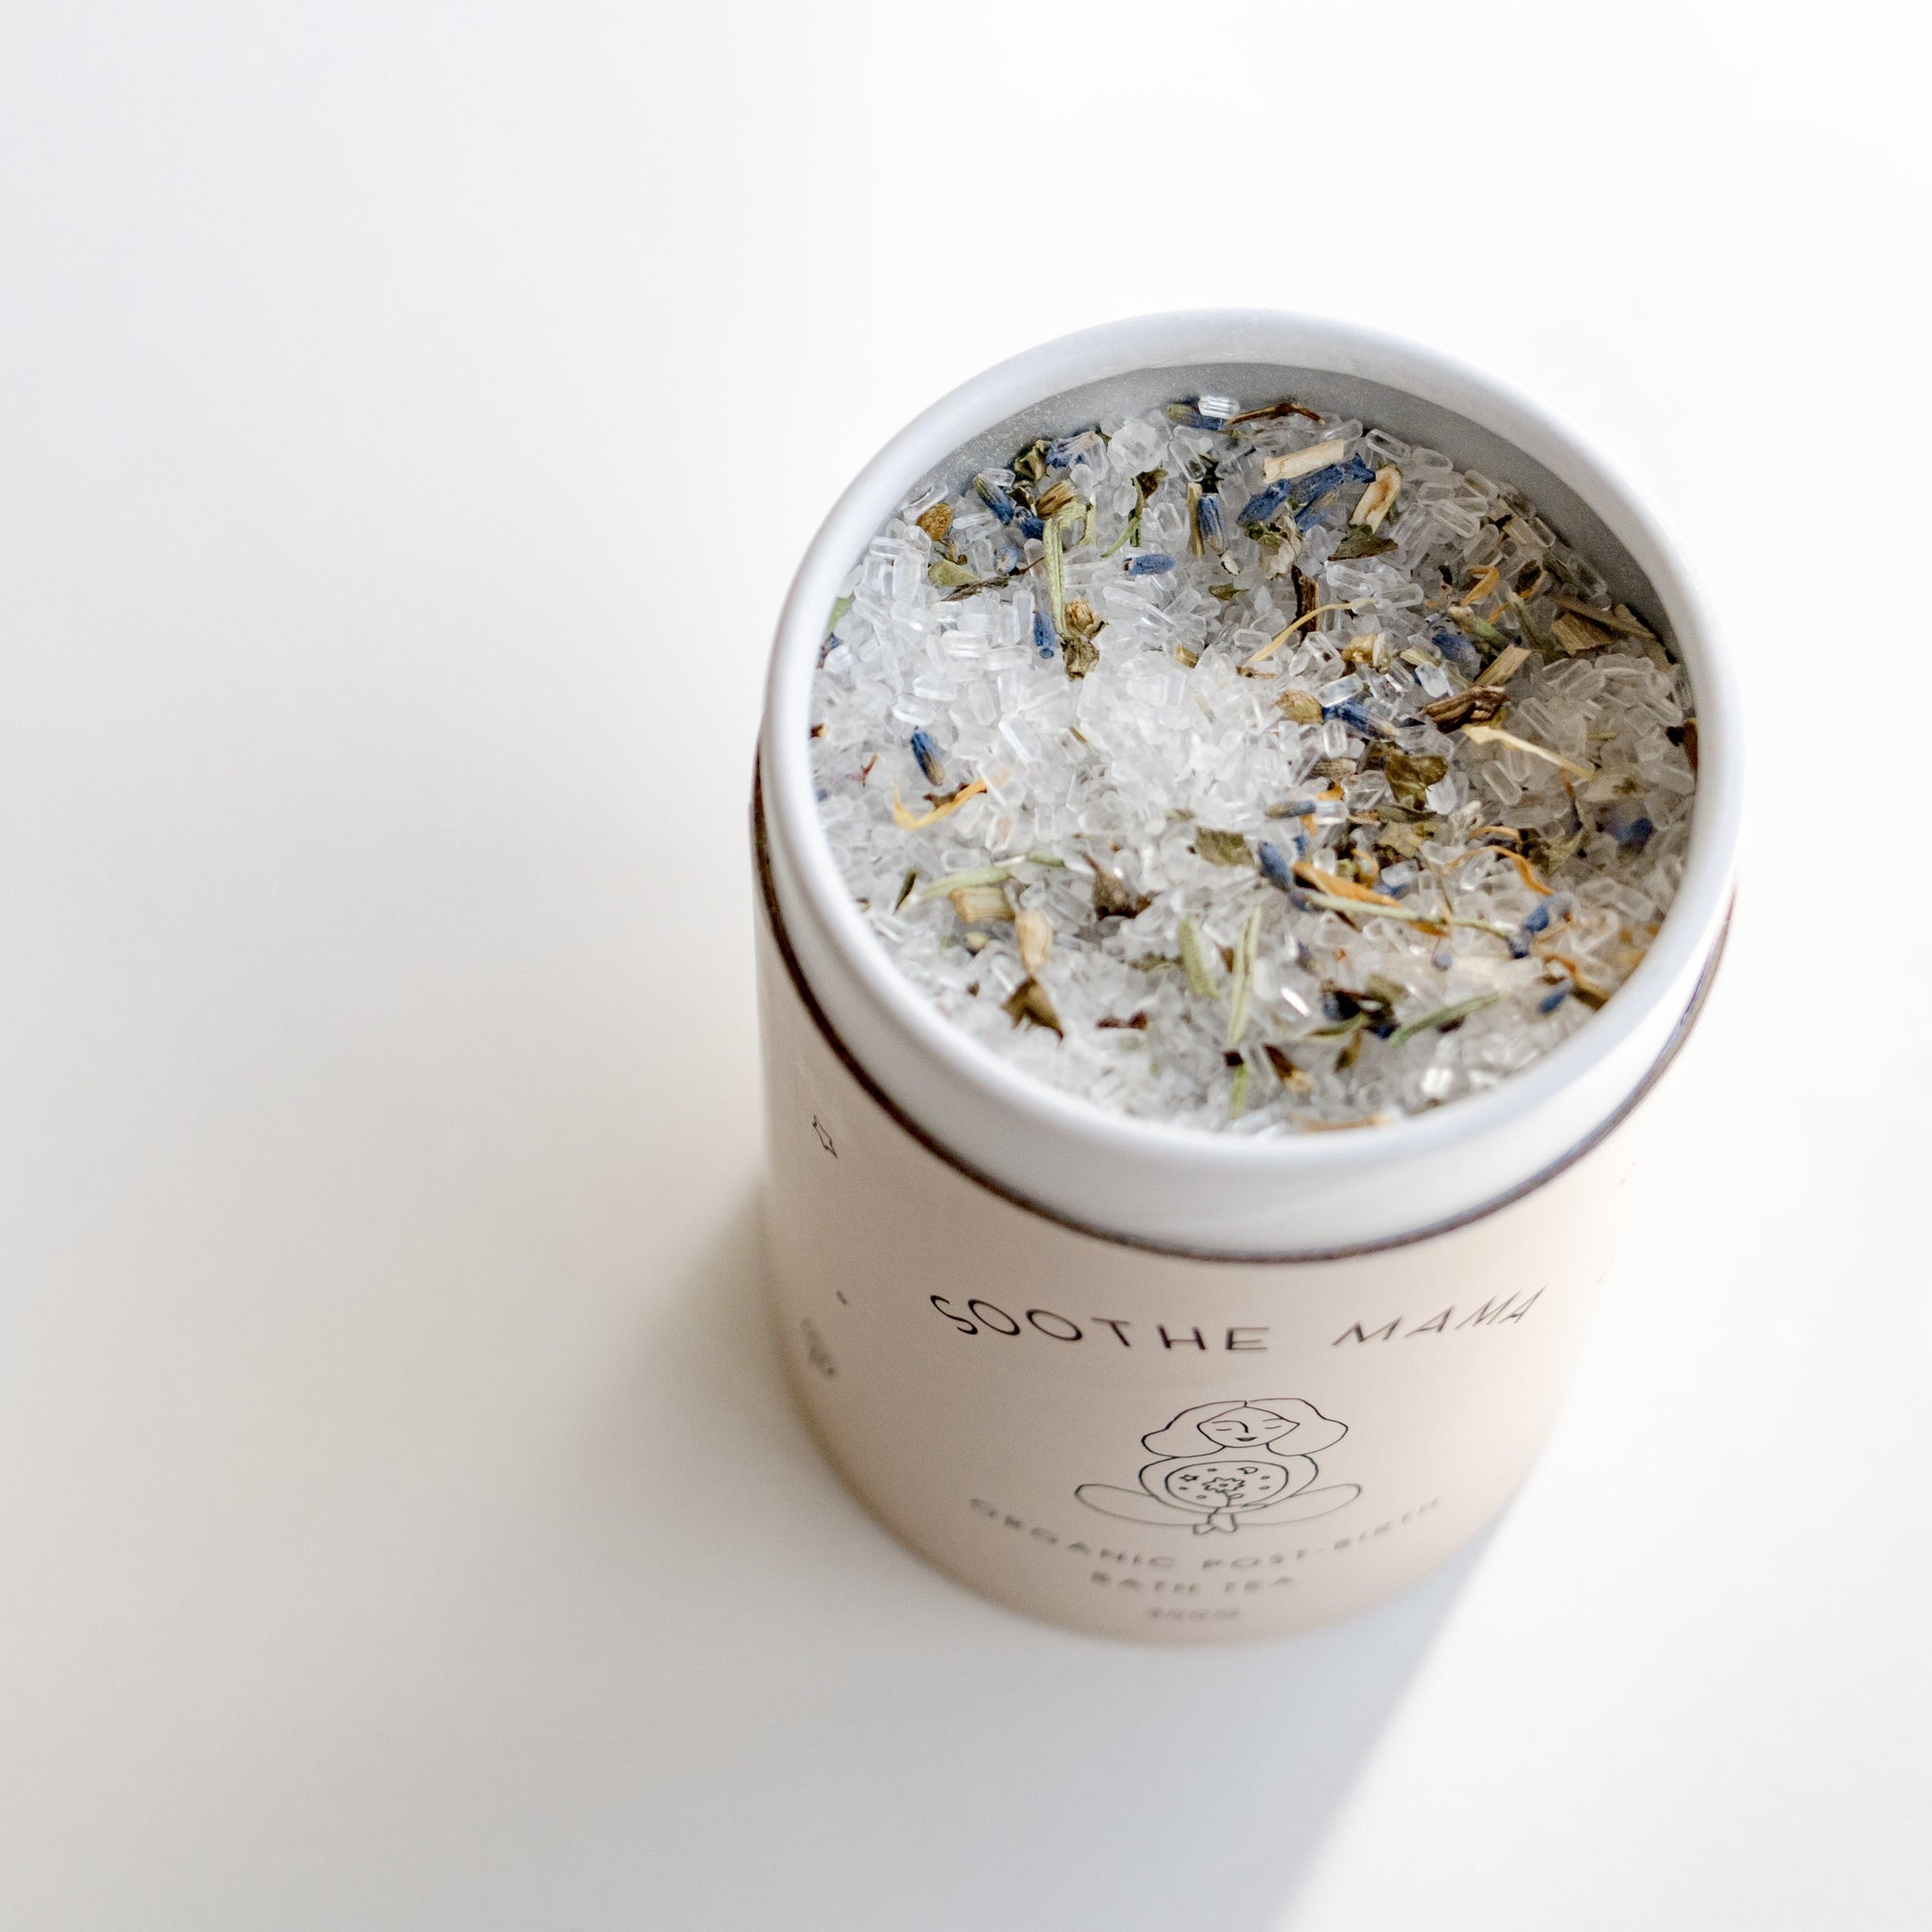 A tin of Seasons of Mama Soothe Mama Organic Post-Birth Bath Tea., resting on a white surface.